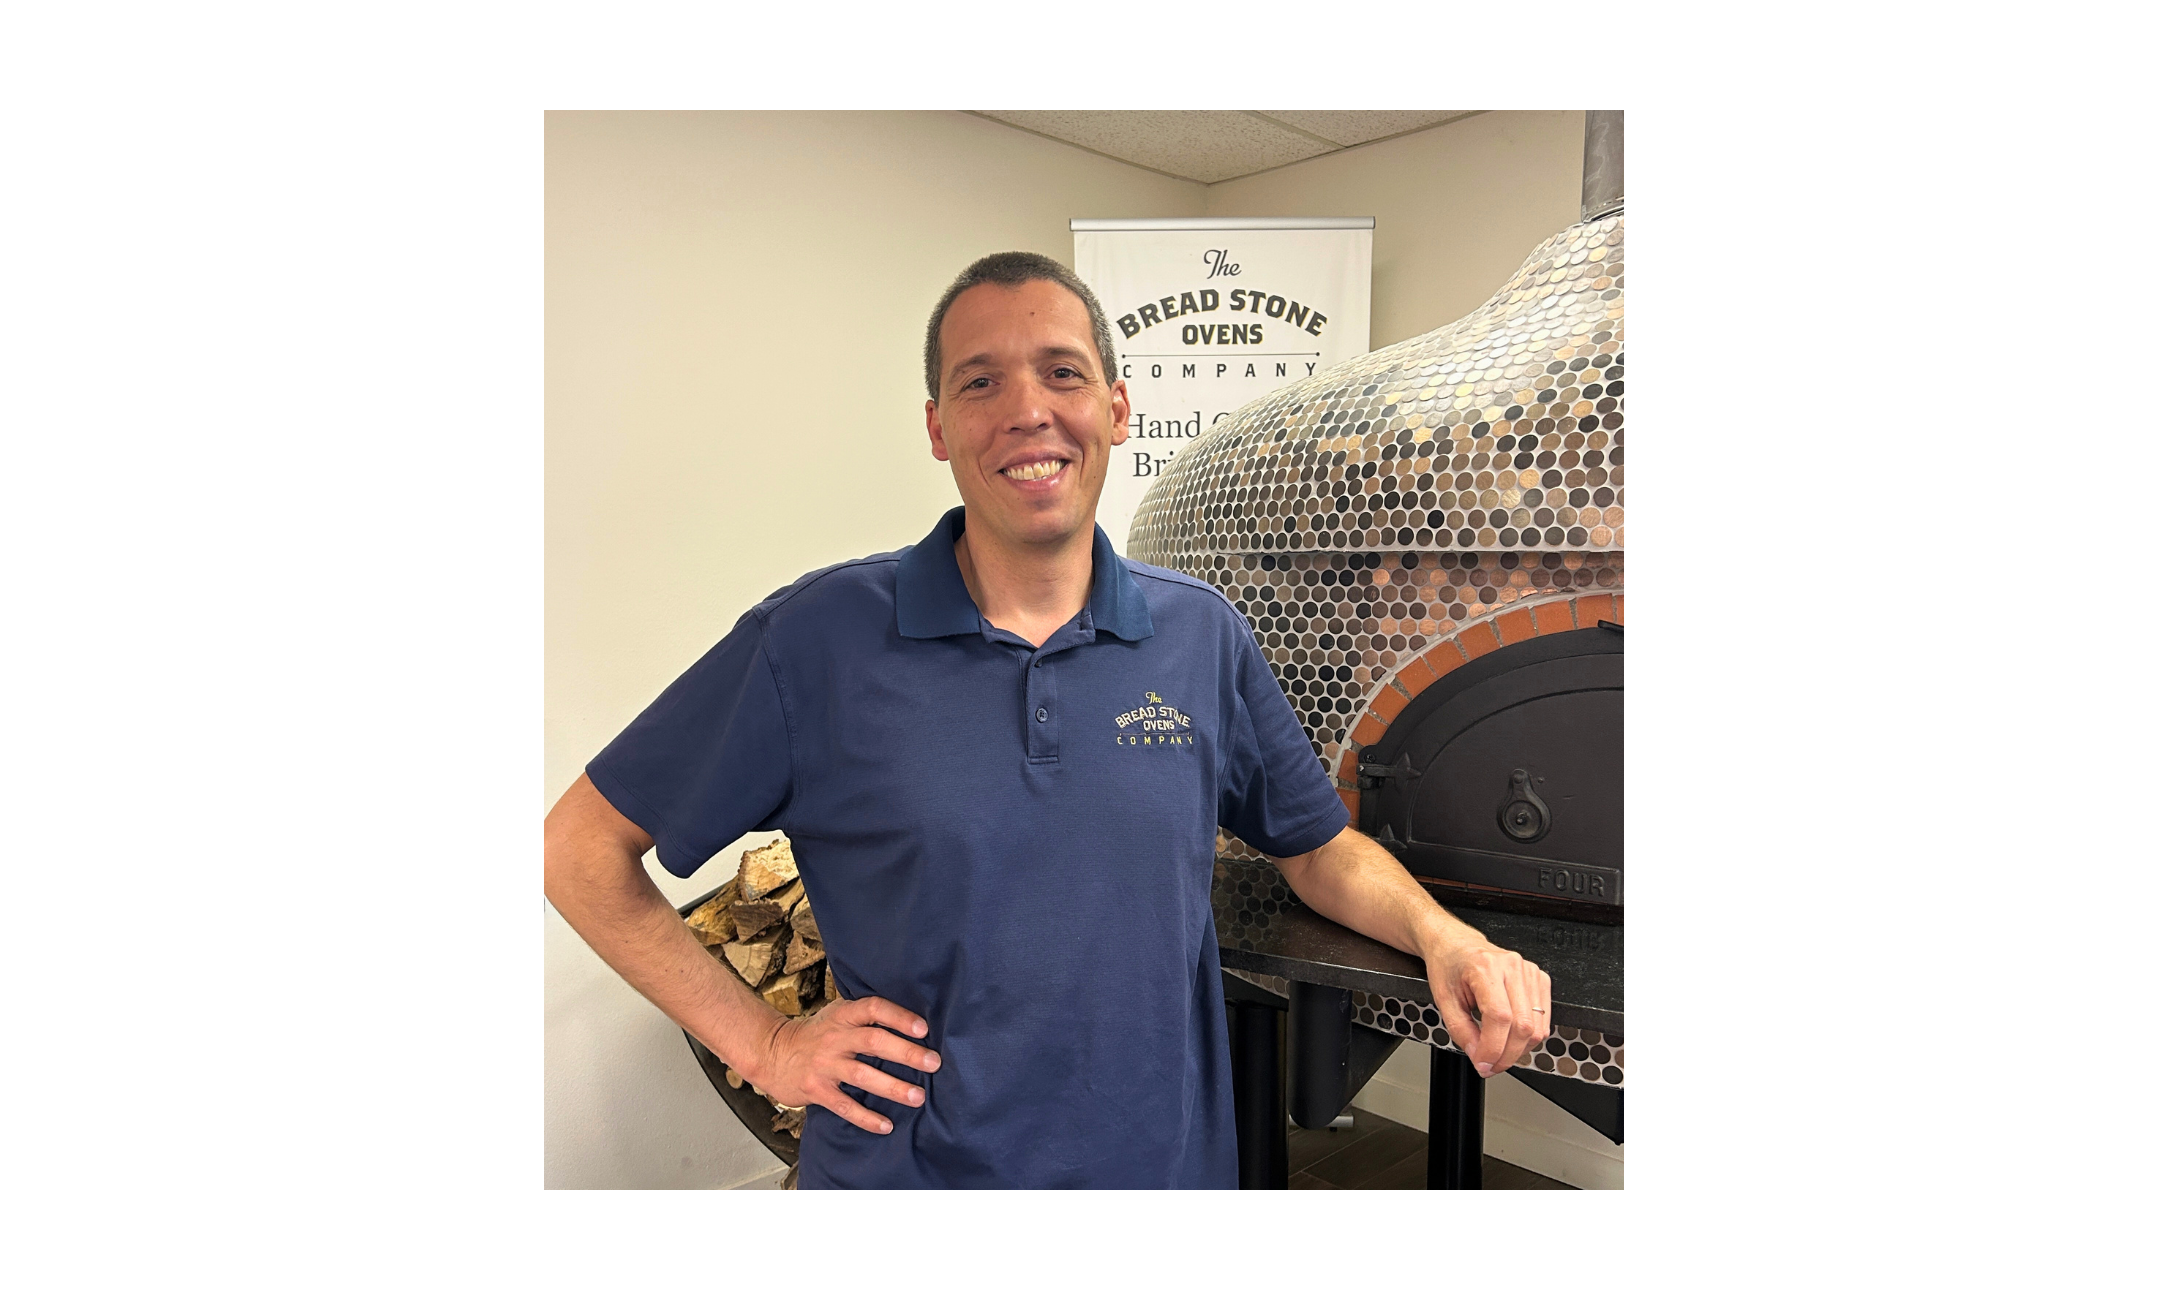 More Than Just a Pizza Oven - The Bread Stone Ovens Company